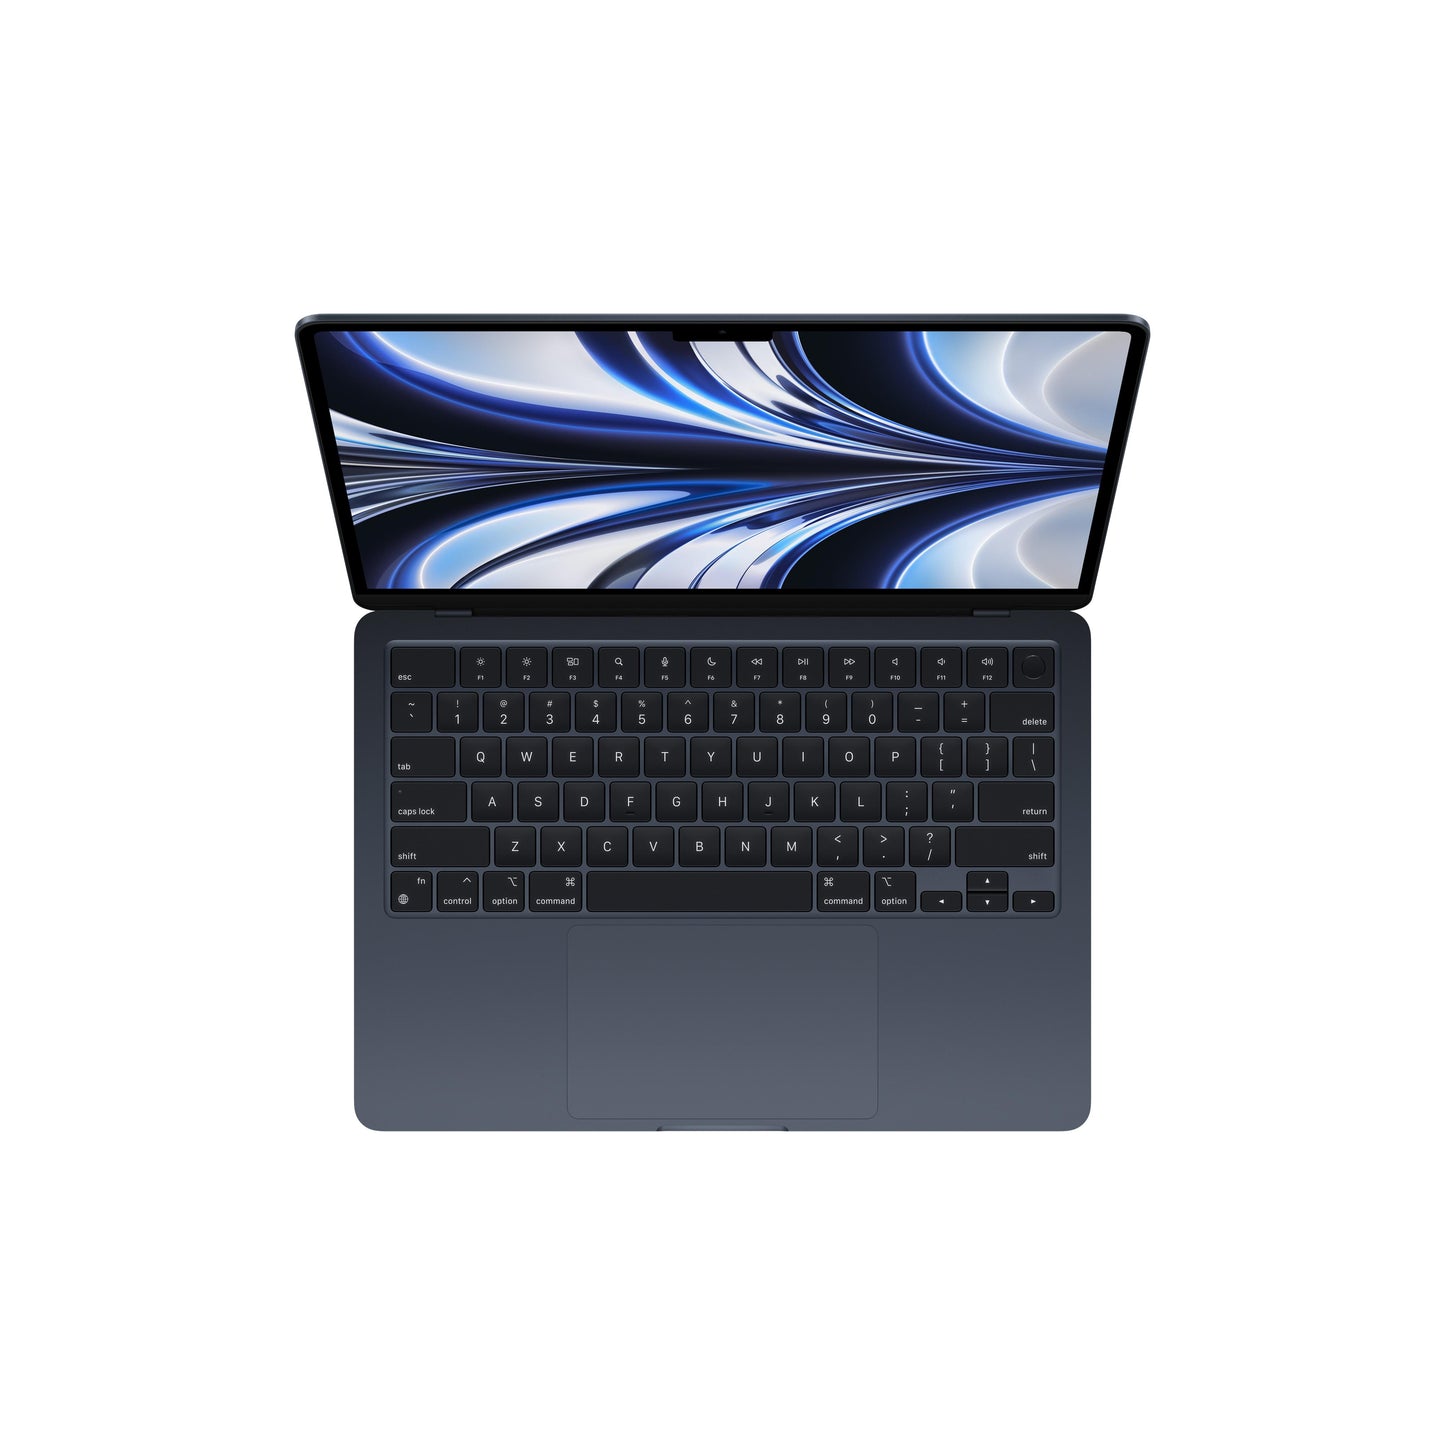 13-inch MacBook Air: Apple M2 chip with 8, core CPU and 8, core GPU, 256GB SSD - Midnight